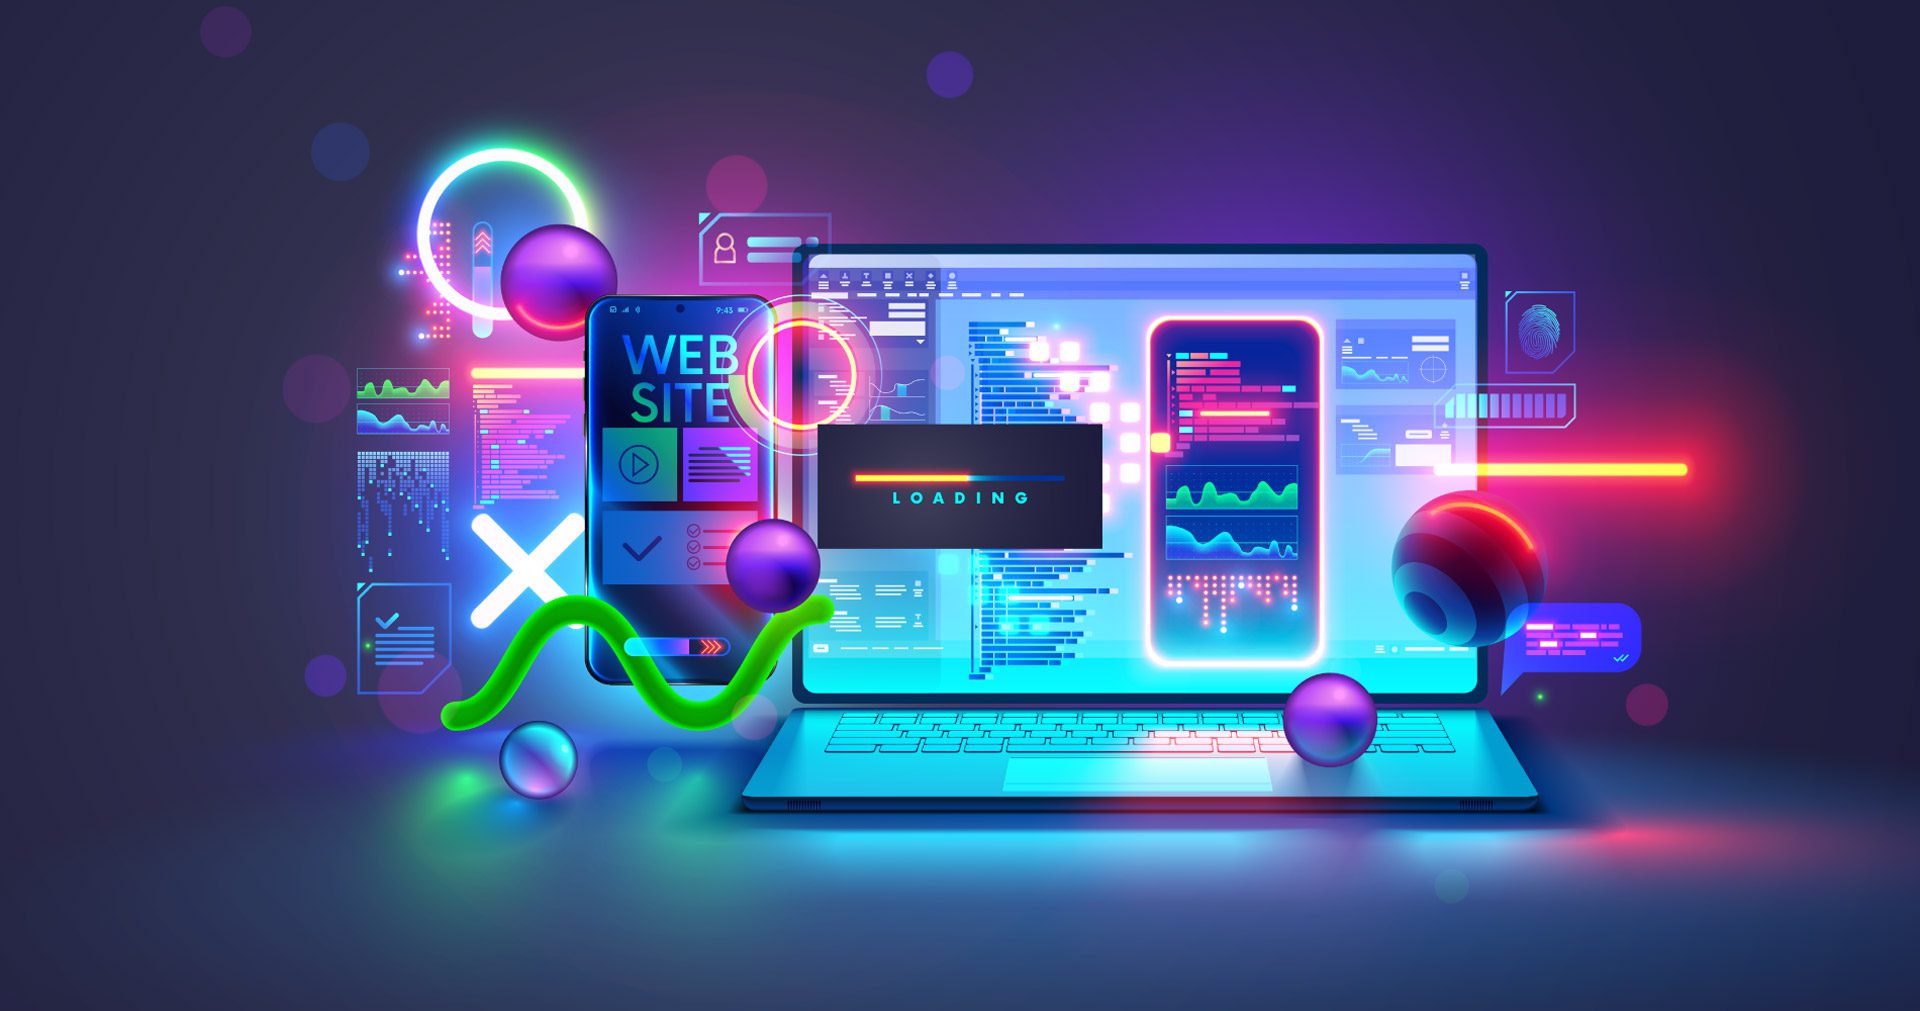 Header Image of elements of a website being built in bright neon